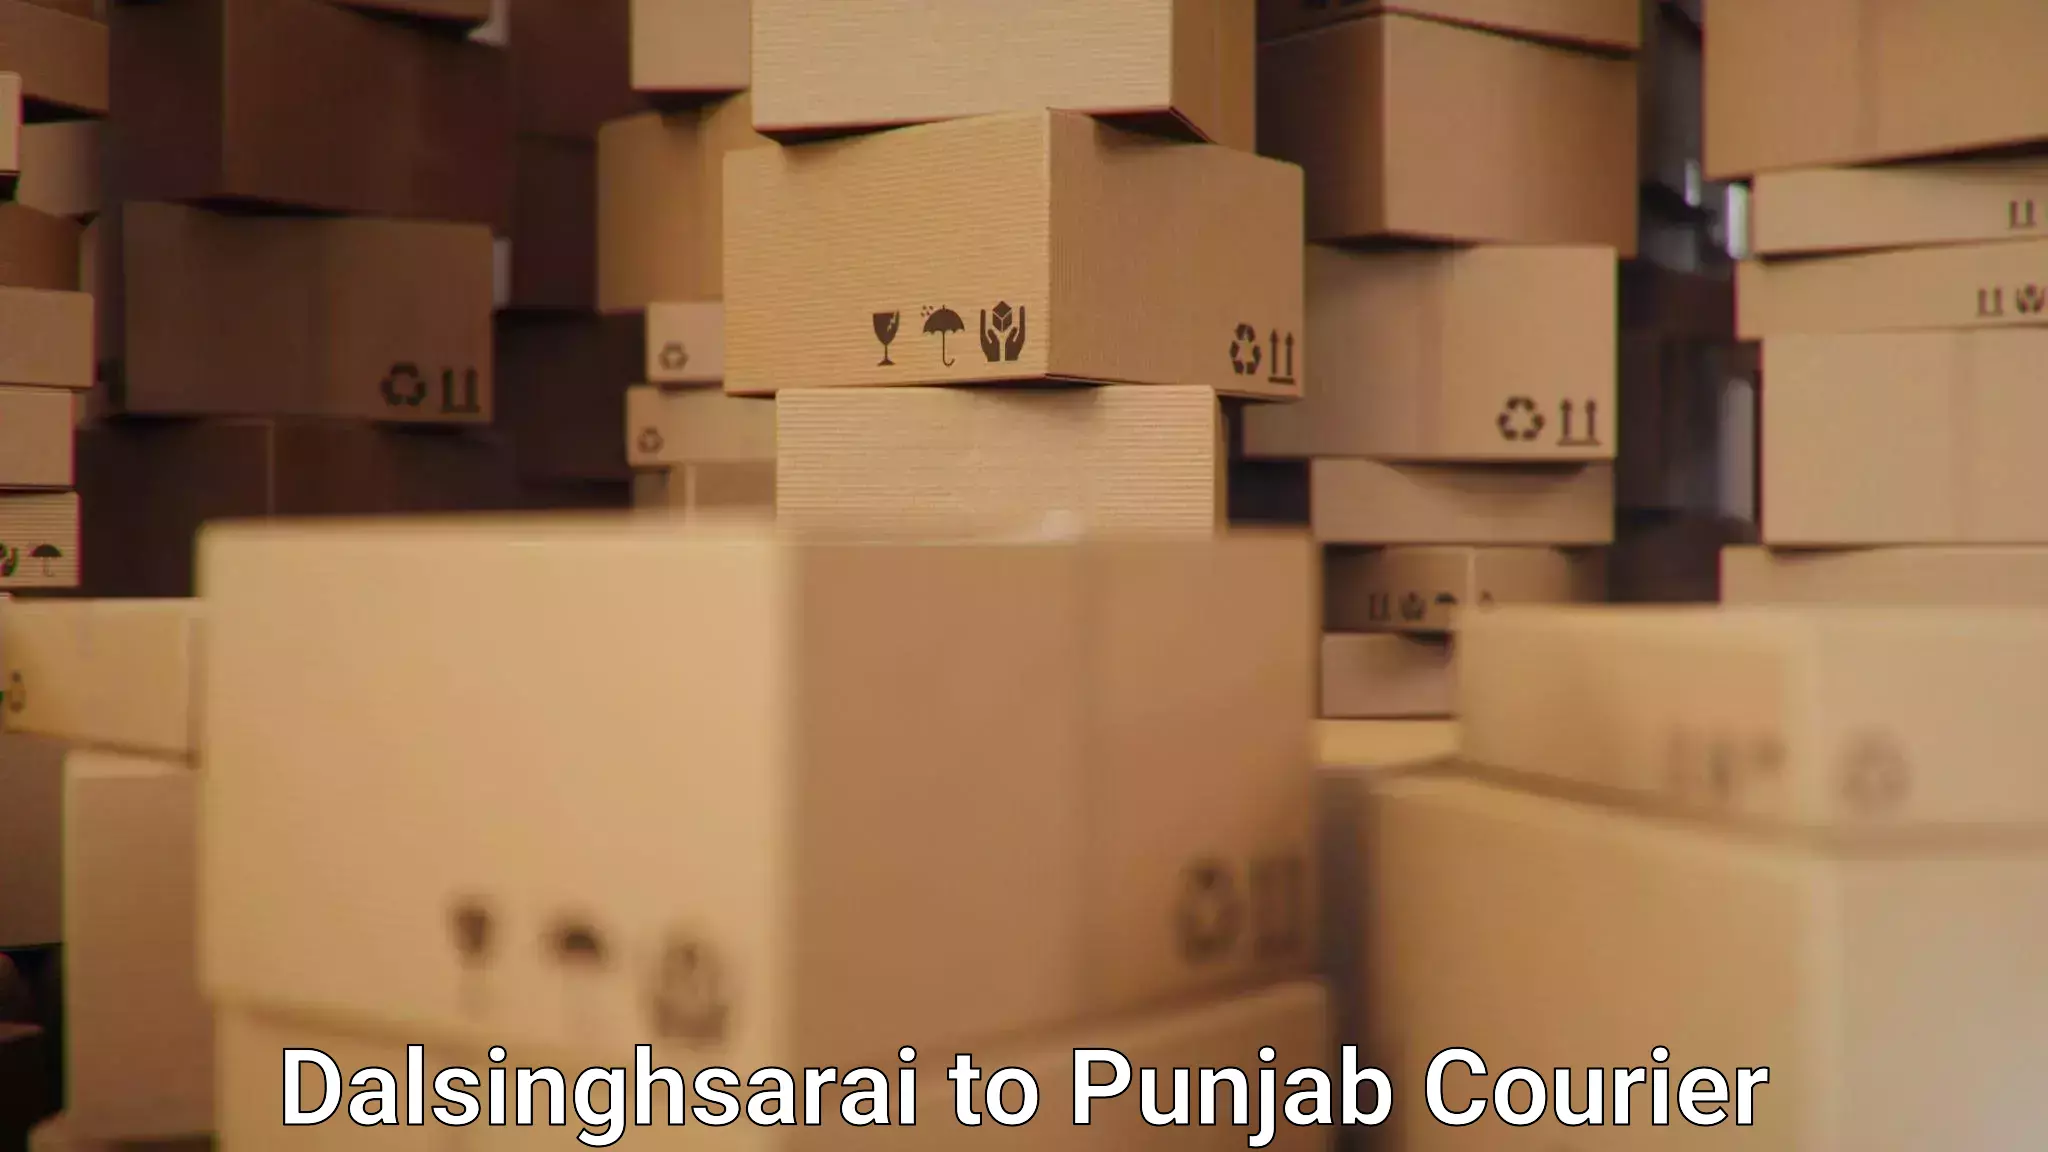 International courier networks Dalsinghsarai to Mohali